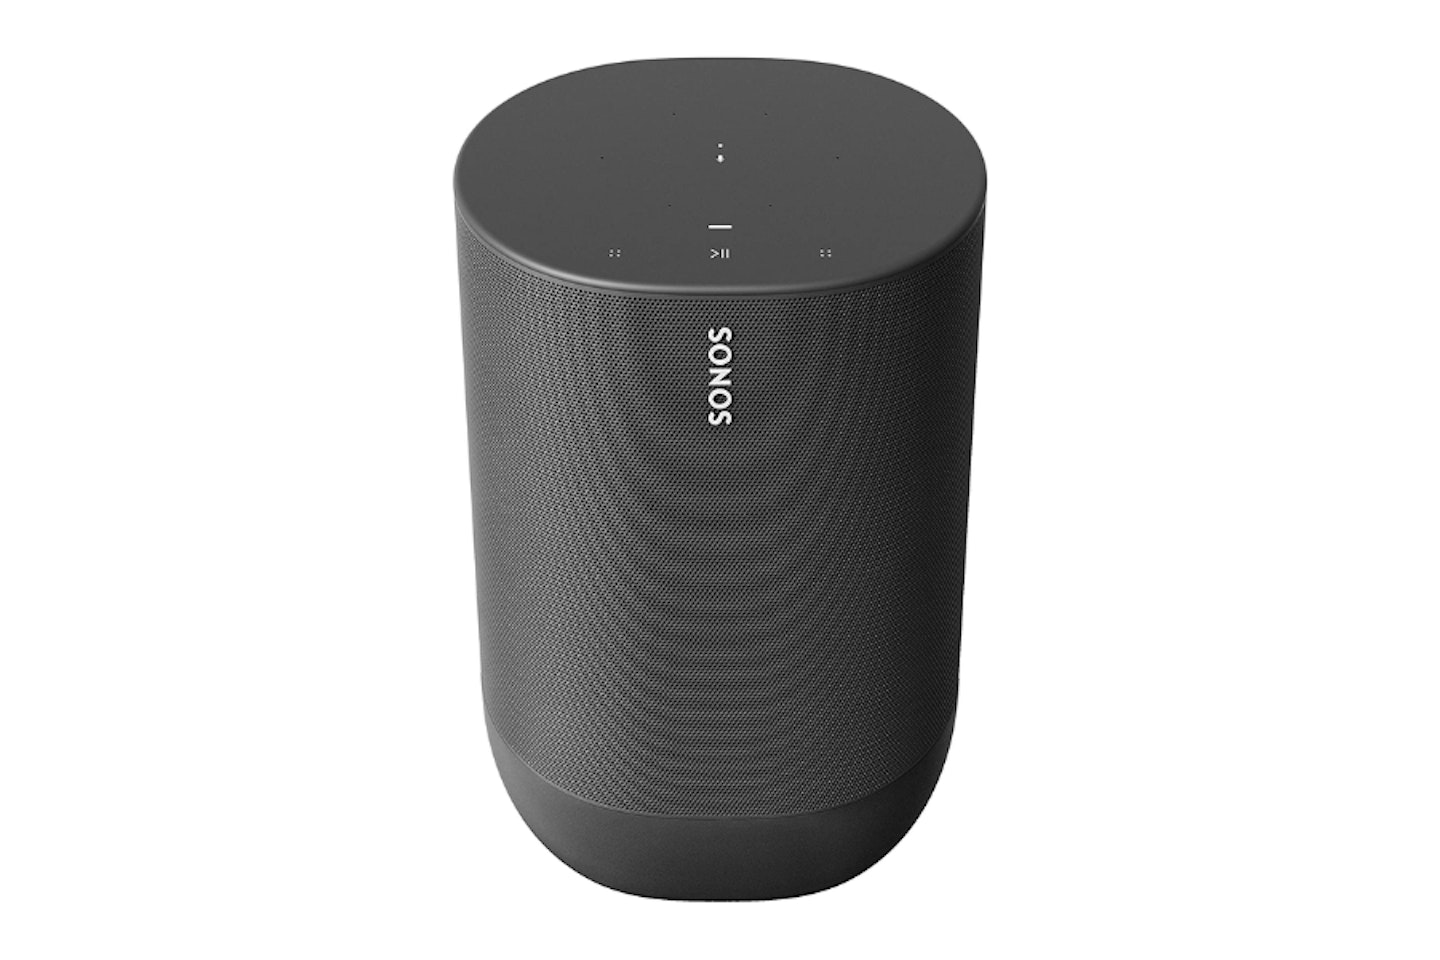 Sonos Move -  one of the best portable speakers